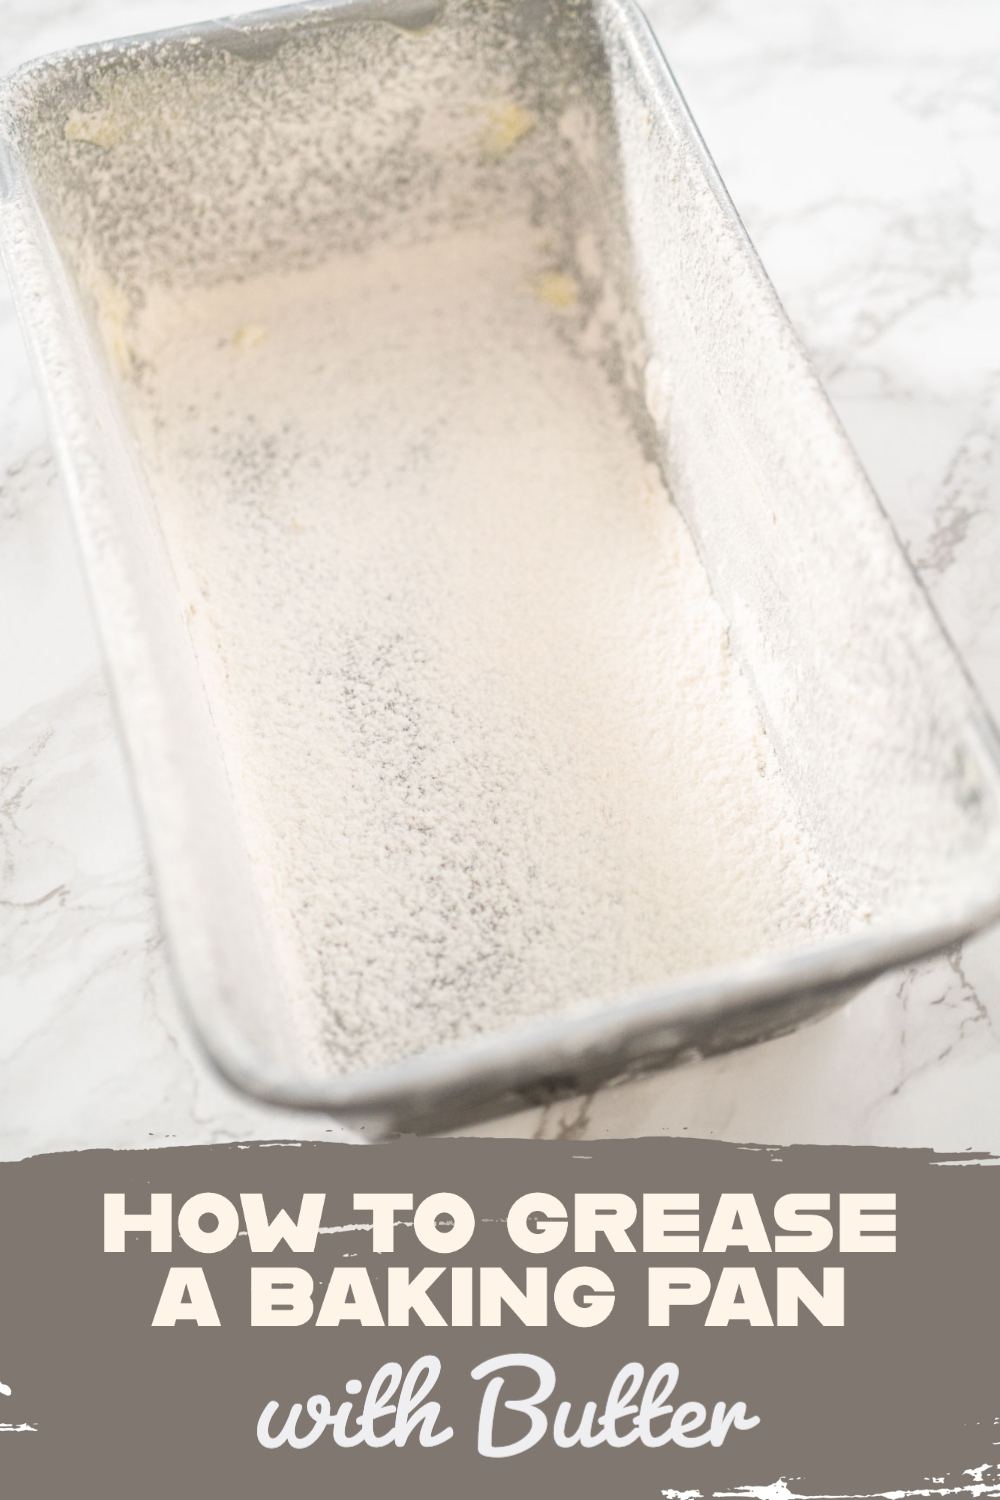 How to Grease a Baking Pan with Butter